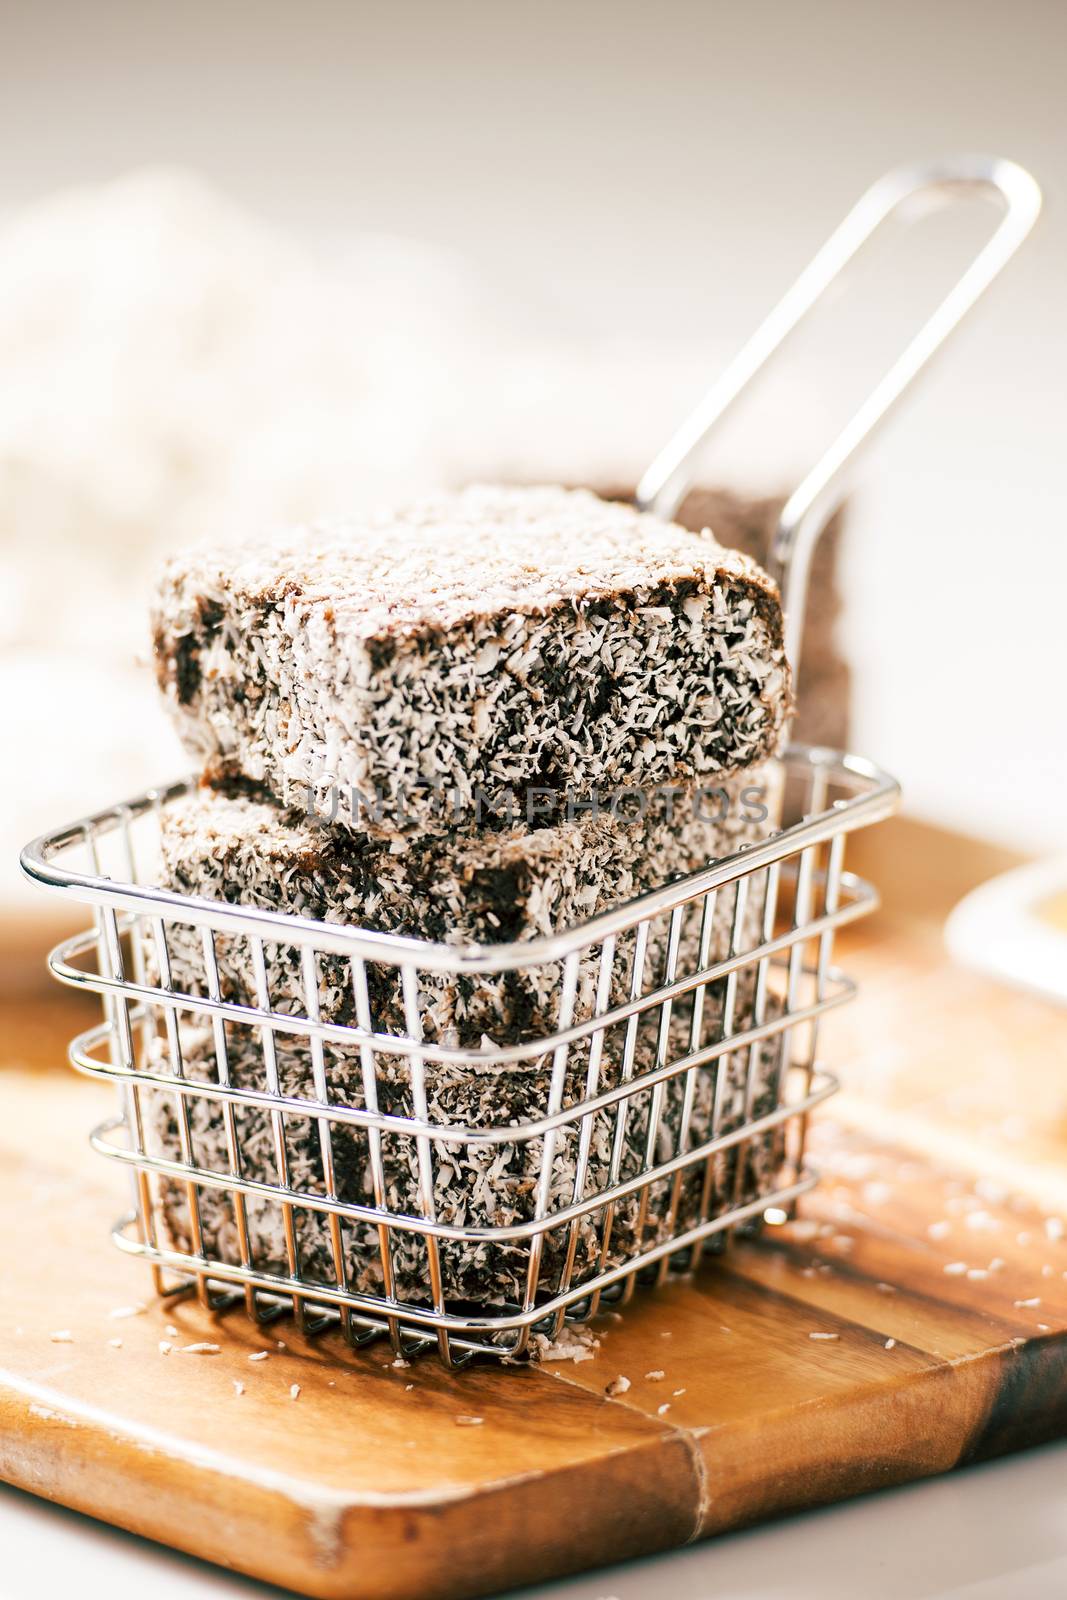 Group of Lamingtons on a timber metal baking tray with food ingredients in the background